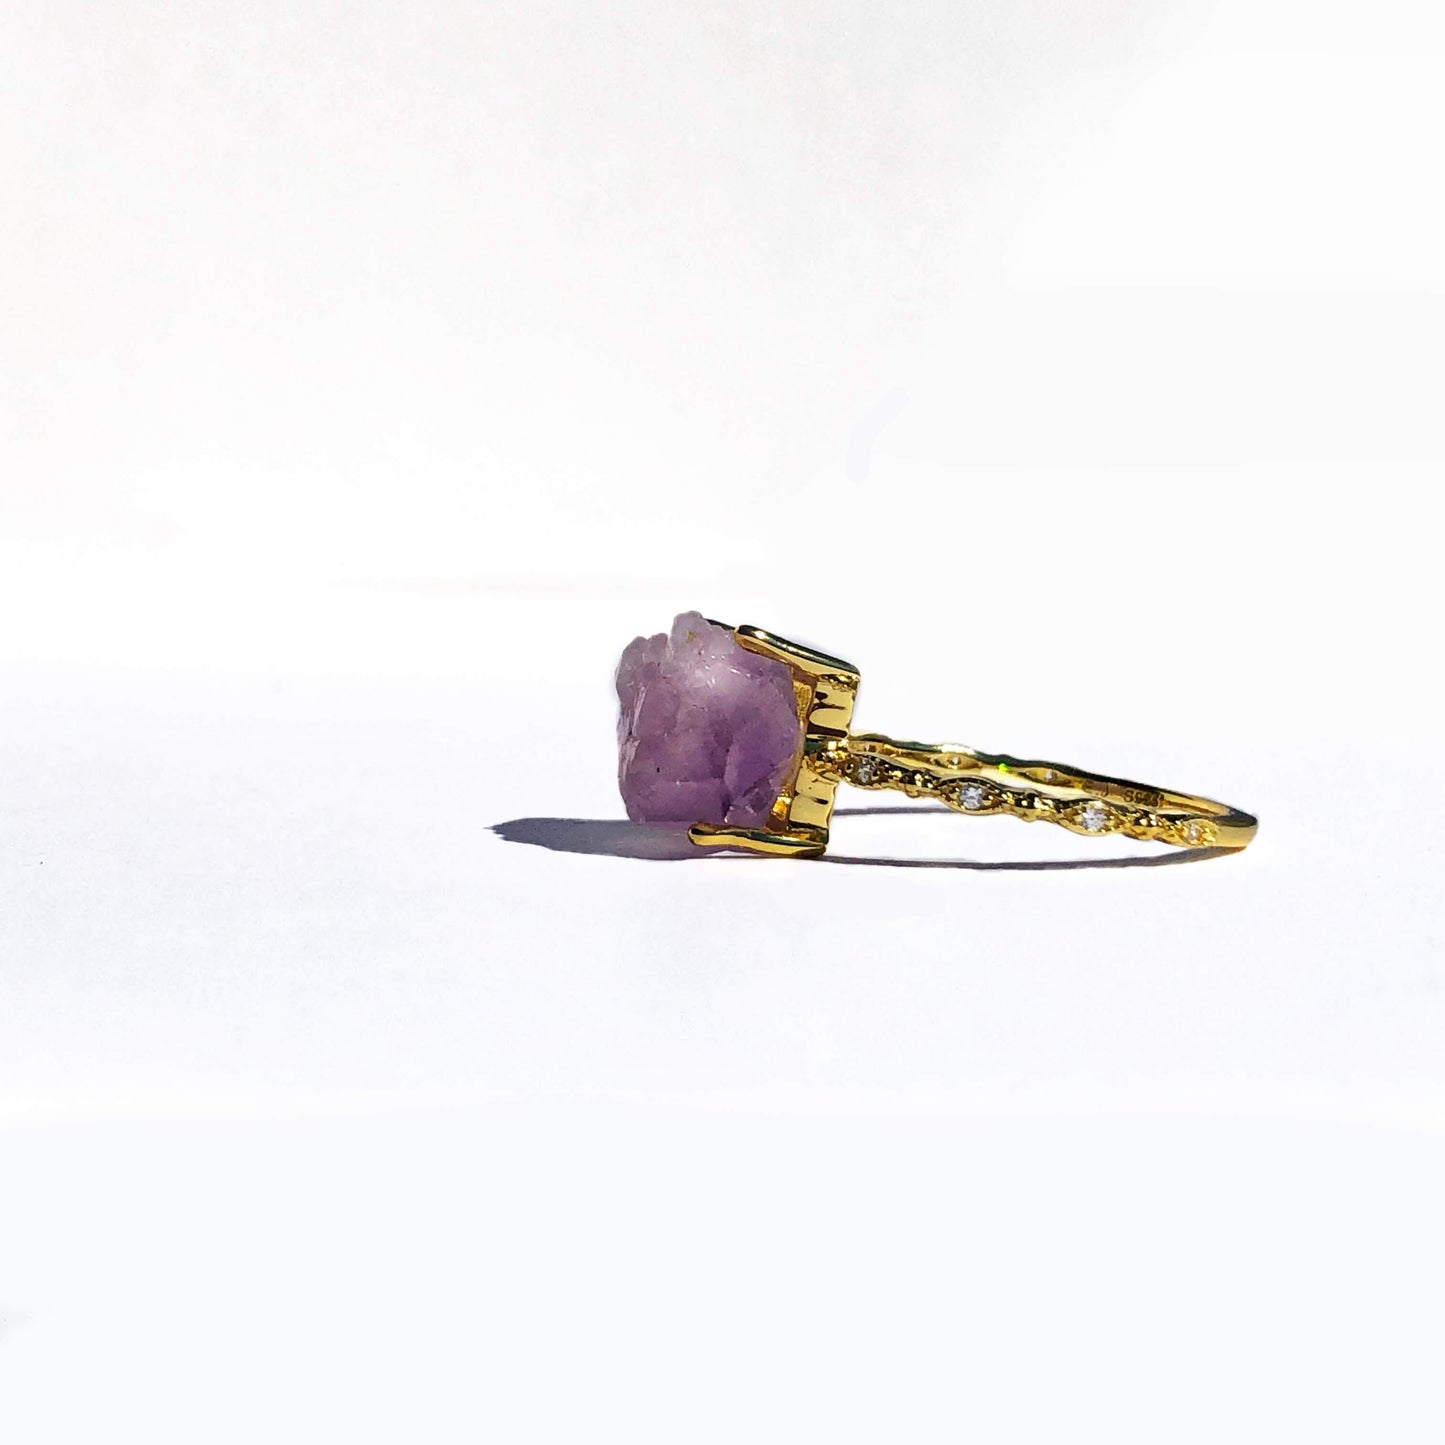 An incredibly rare mineral that only forms in high-temperature volcanic rock, amethyst is a powerful crystal thought to bring protection and to help you remember your dreams. This ring features a raw amethyst quartz stone,  dipped in 14K gold and trimmed with AAA-grade cubic zirconia stones to give it a glamorous feel. The band is made from .925 sterling silver to make it hypoallergenic for what will be your most worn ring.